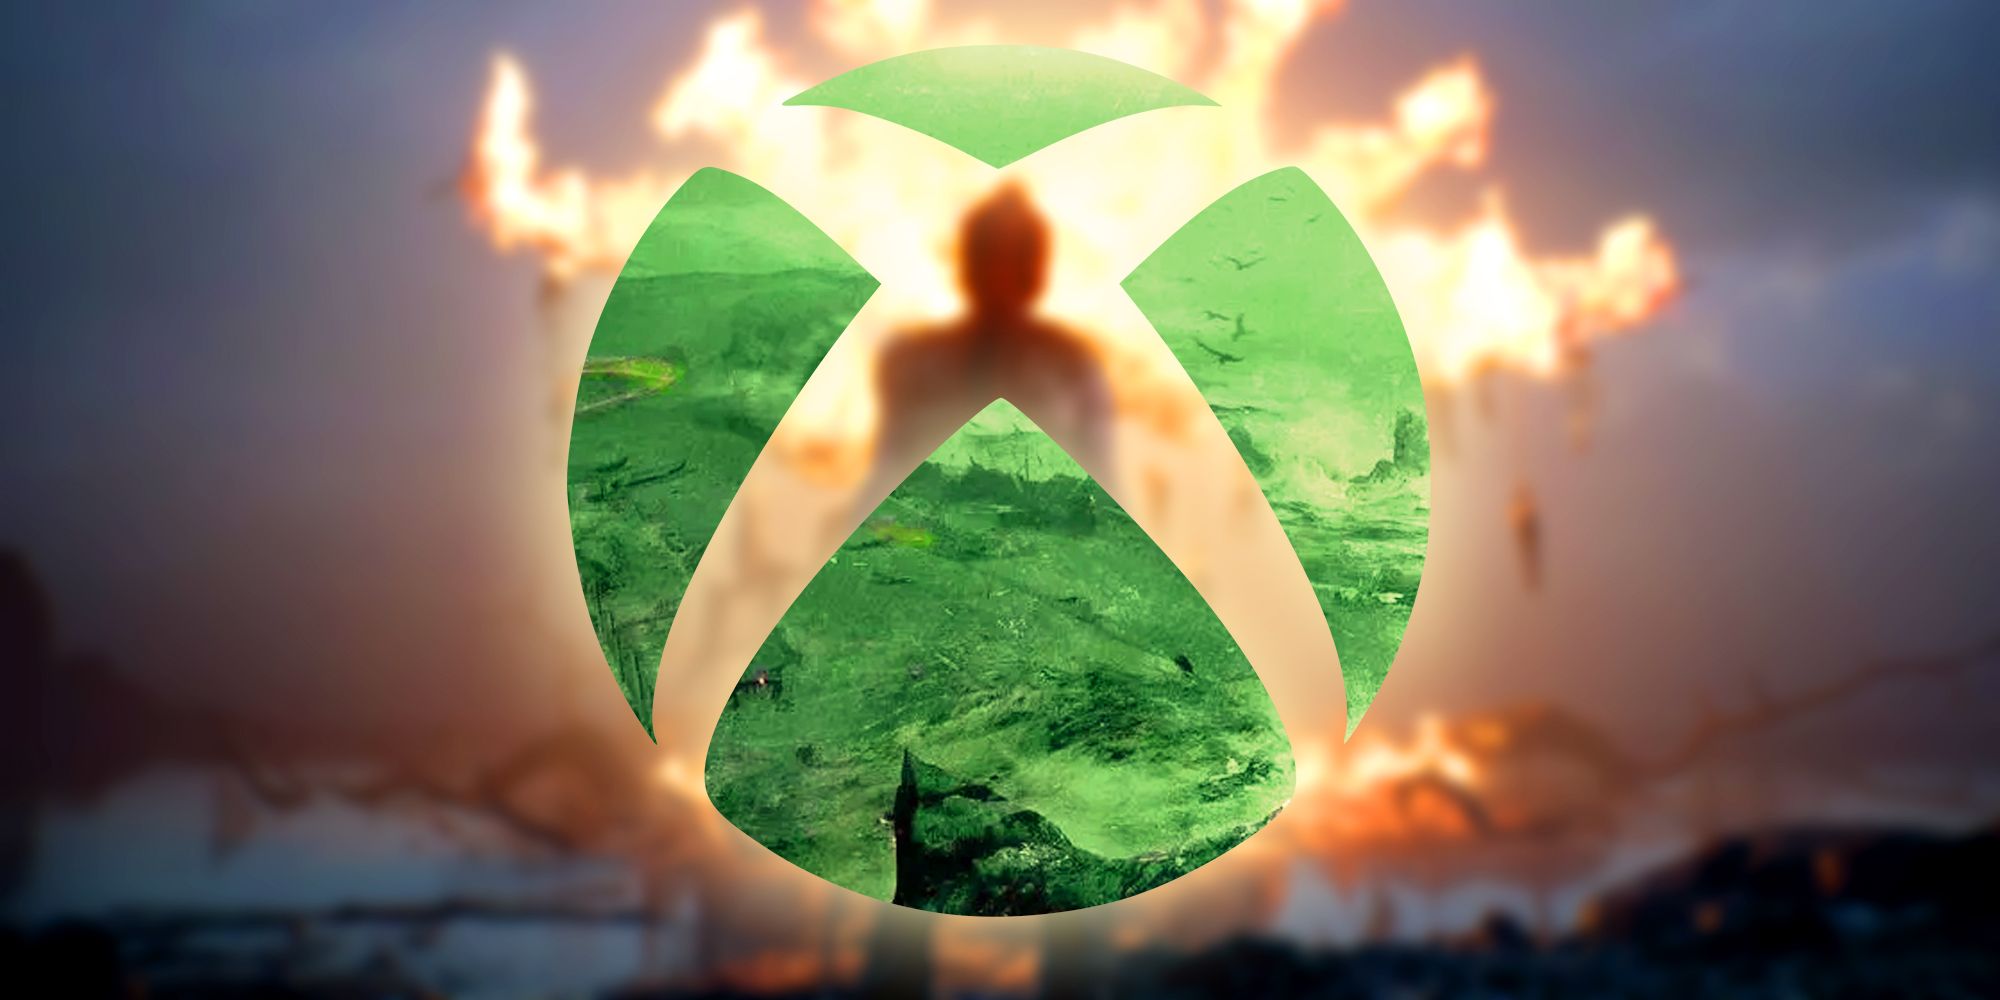 The Xbox logo in front of an image of Hellblade 2 with a burning tree.